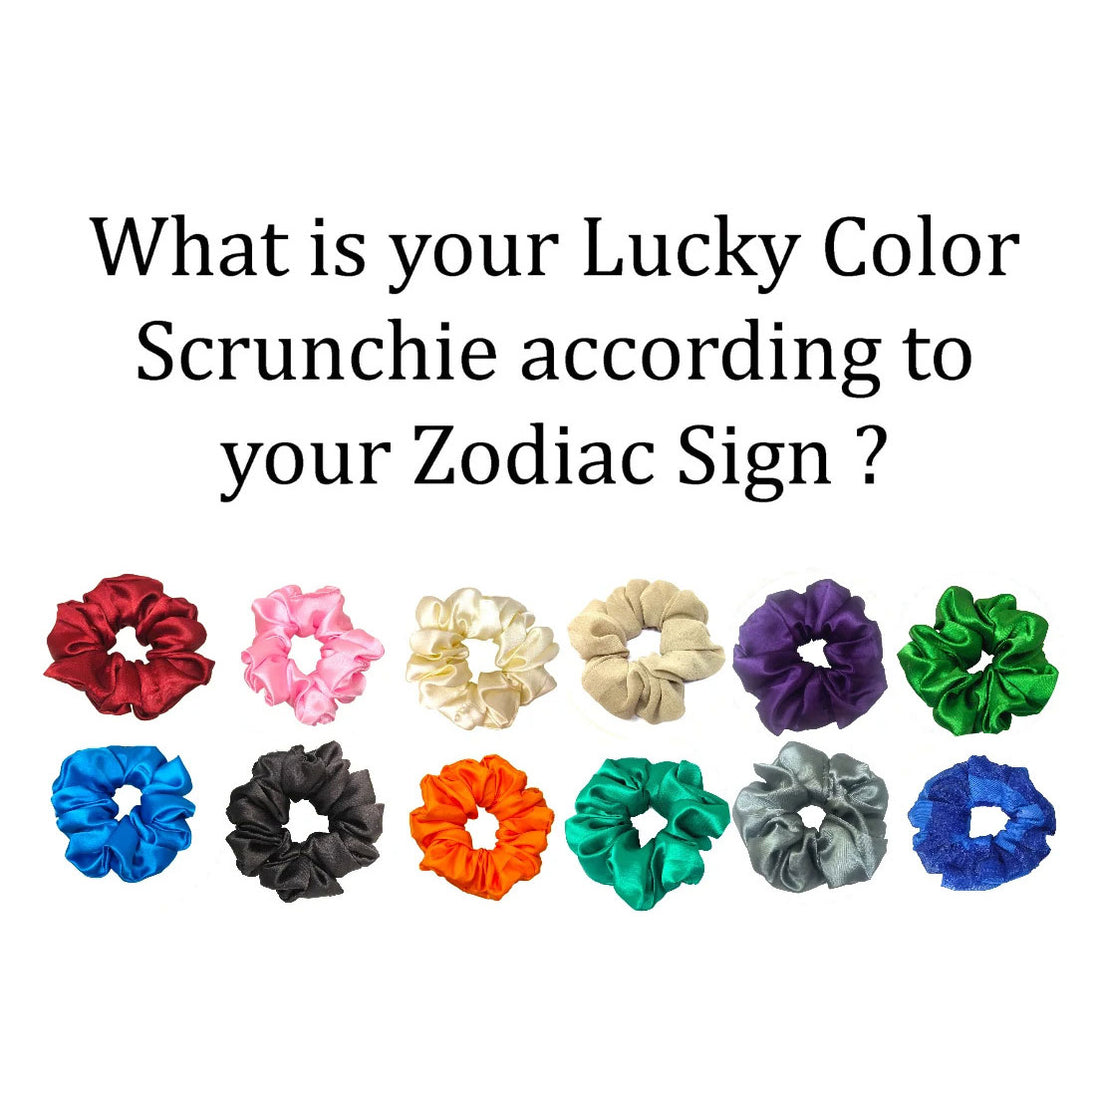 The Ideal Scrunchie You should wear based on your Zodiac